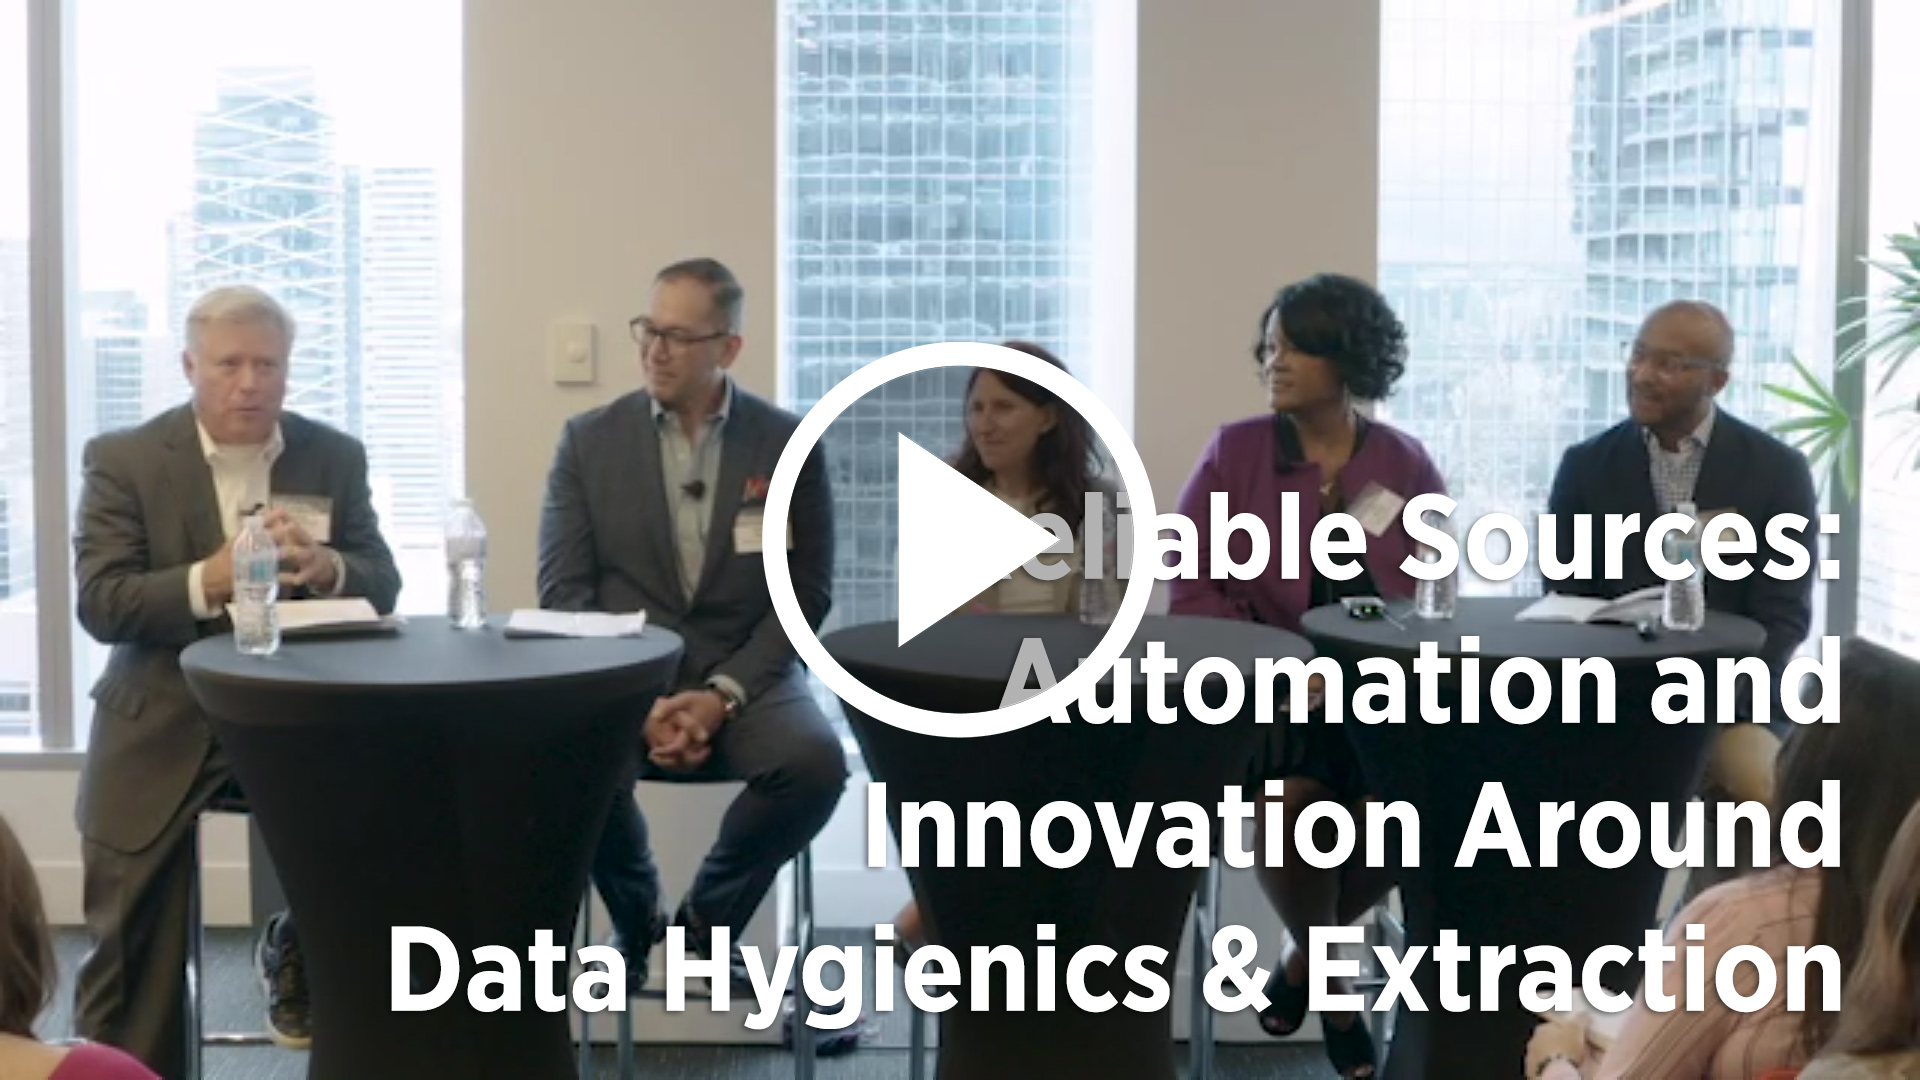 Reliable Sources: Automation and Innovation Around Data Hygienics & Extraction